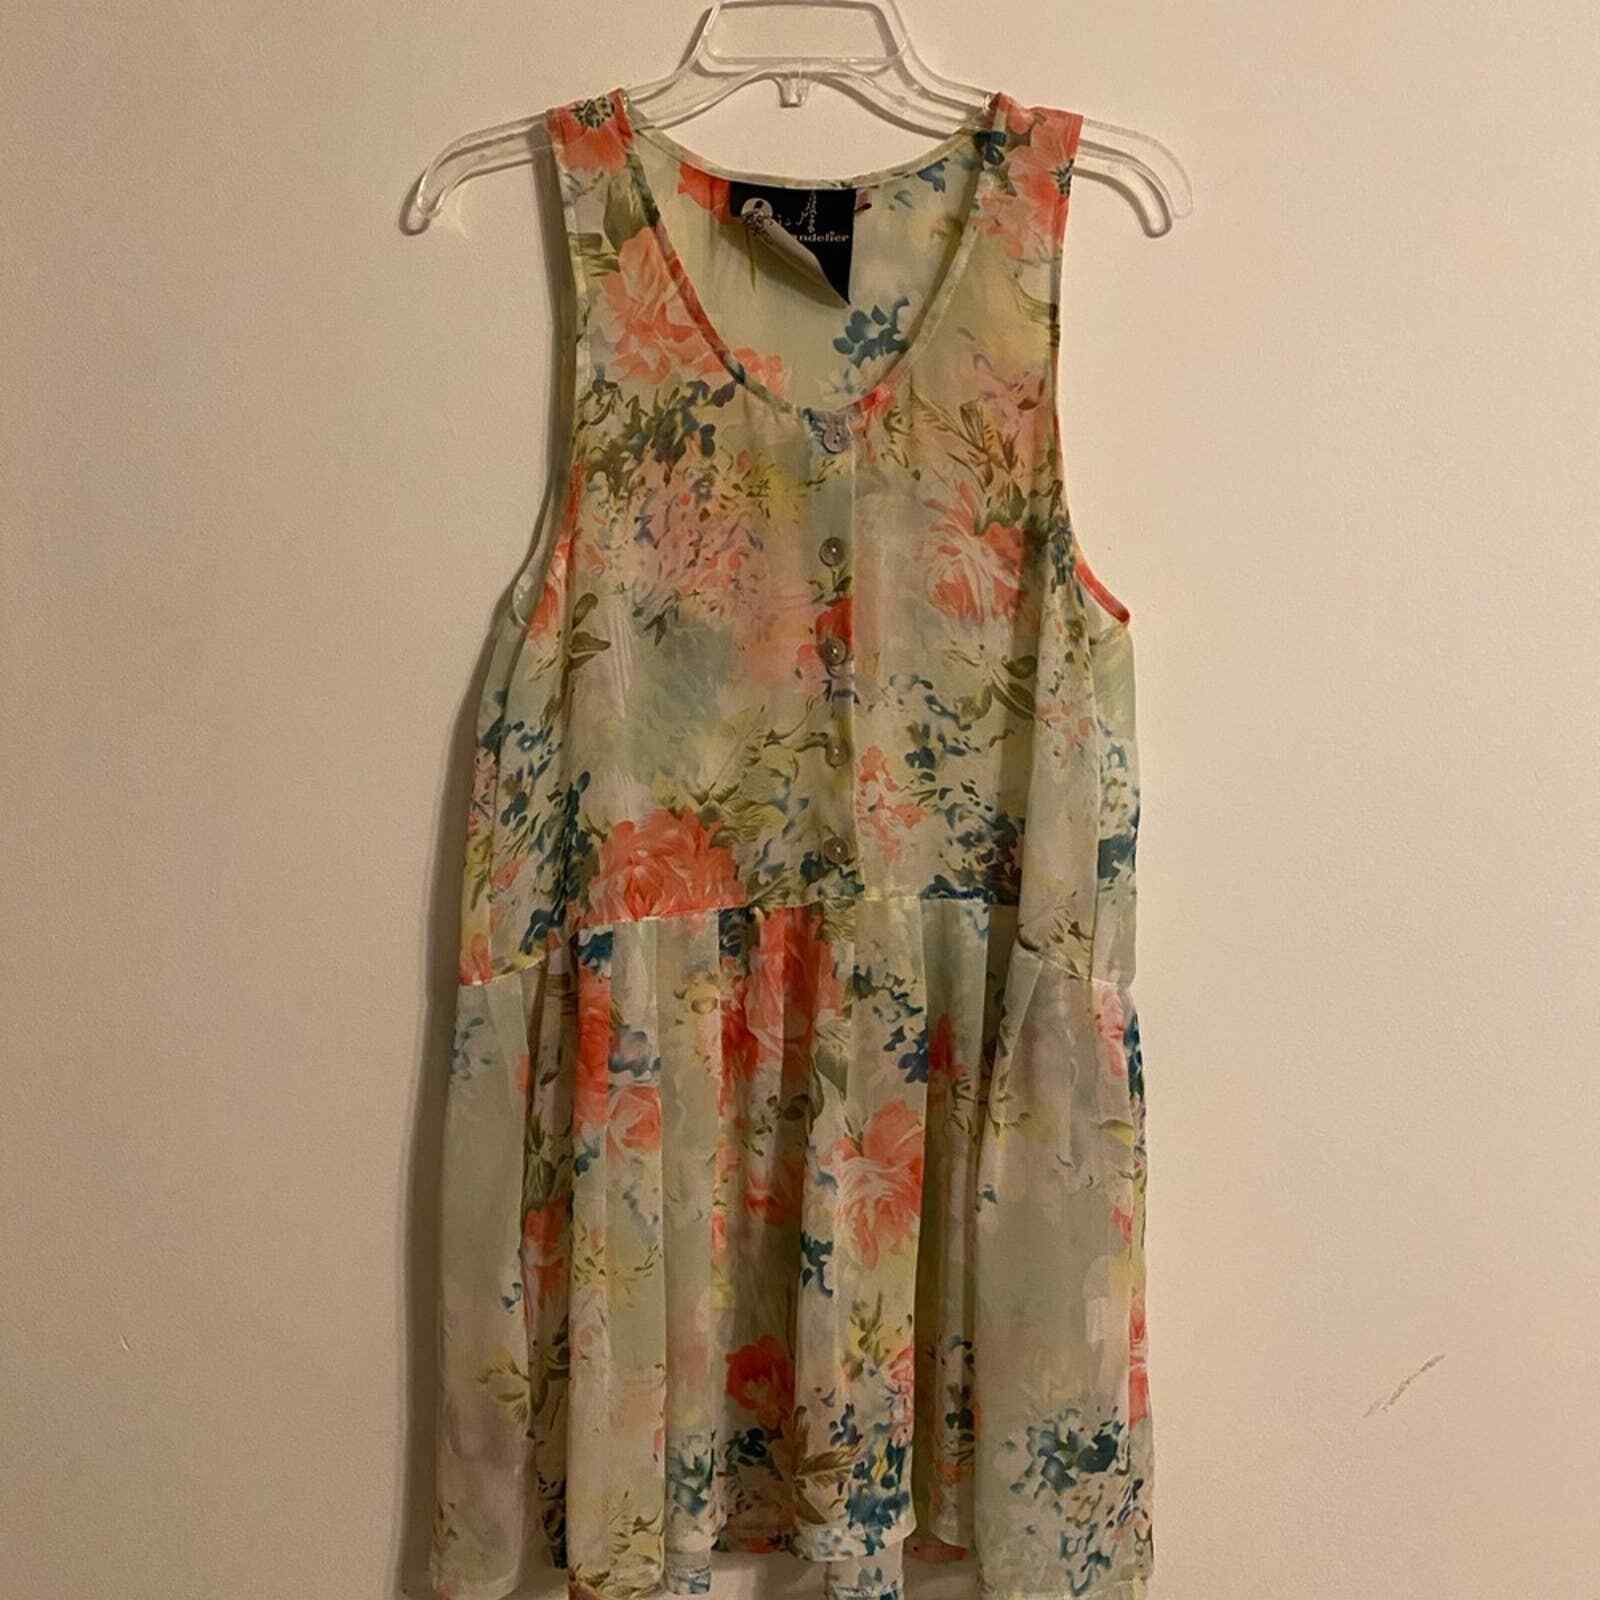 LF Chandelier Sheer Floral Sleeveless Tunic Top - image 2